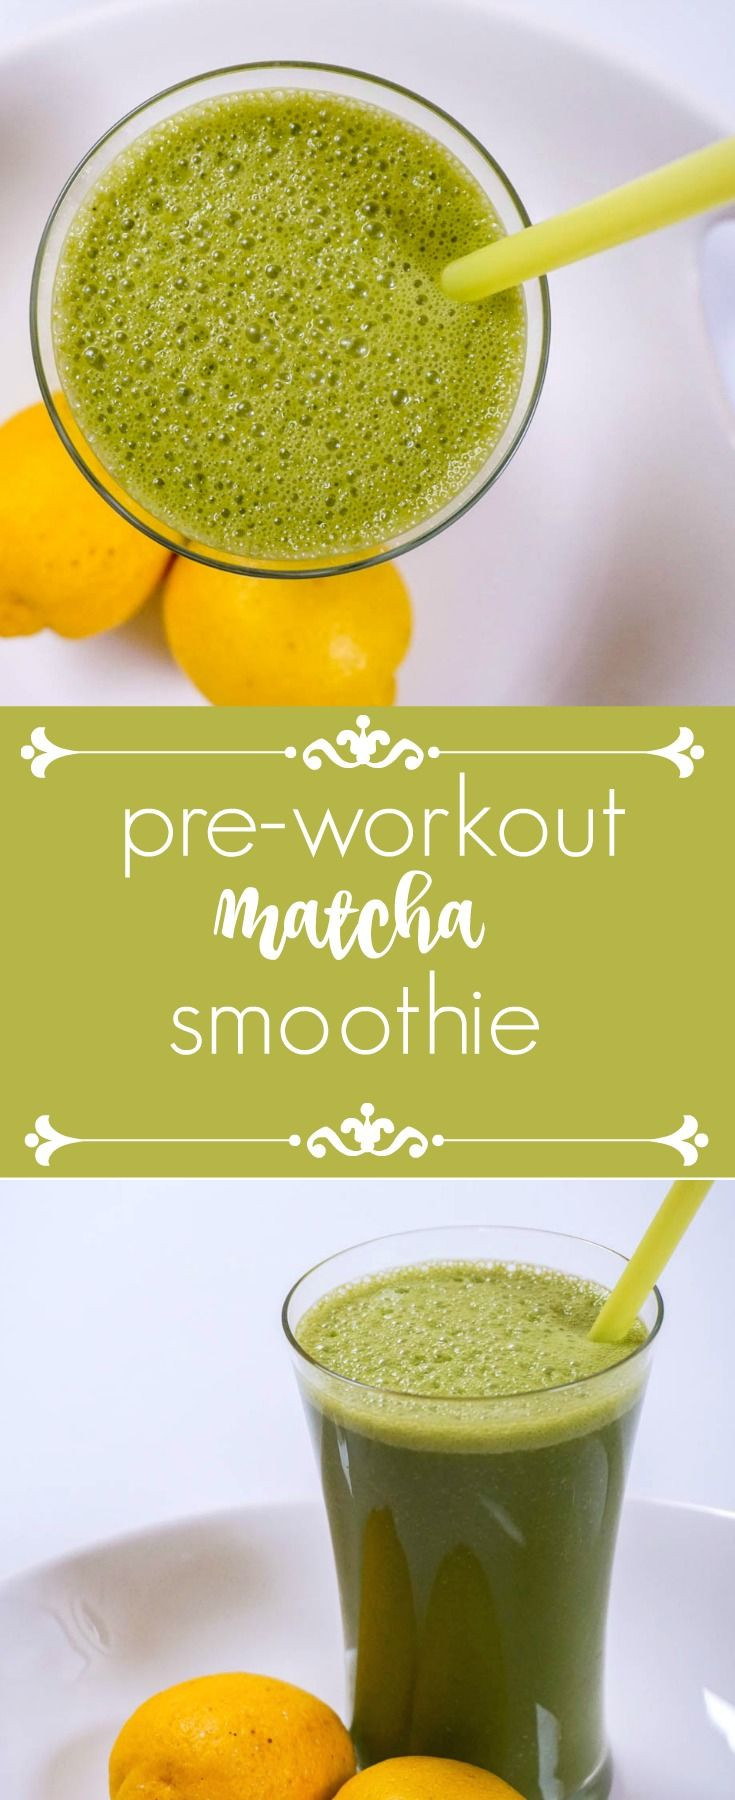 Pre Workout Smoothie Recipes
 Pre Workout Smoothie Recipe in 2020